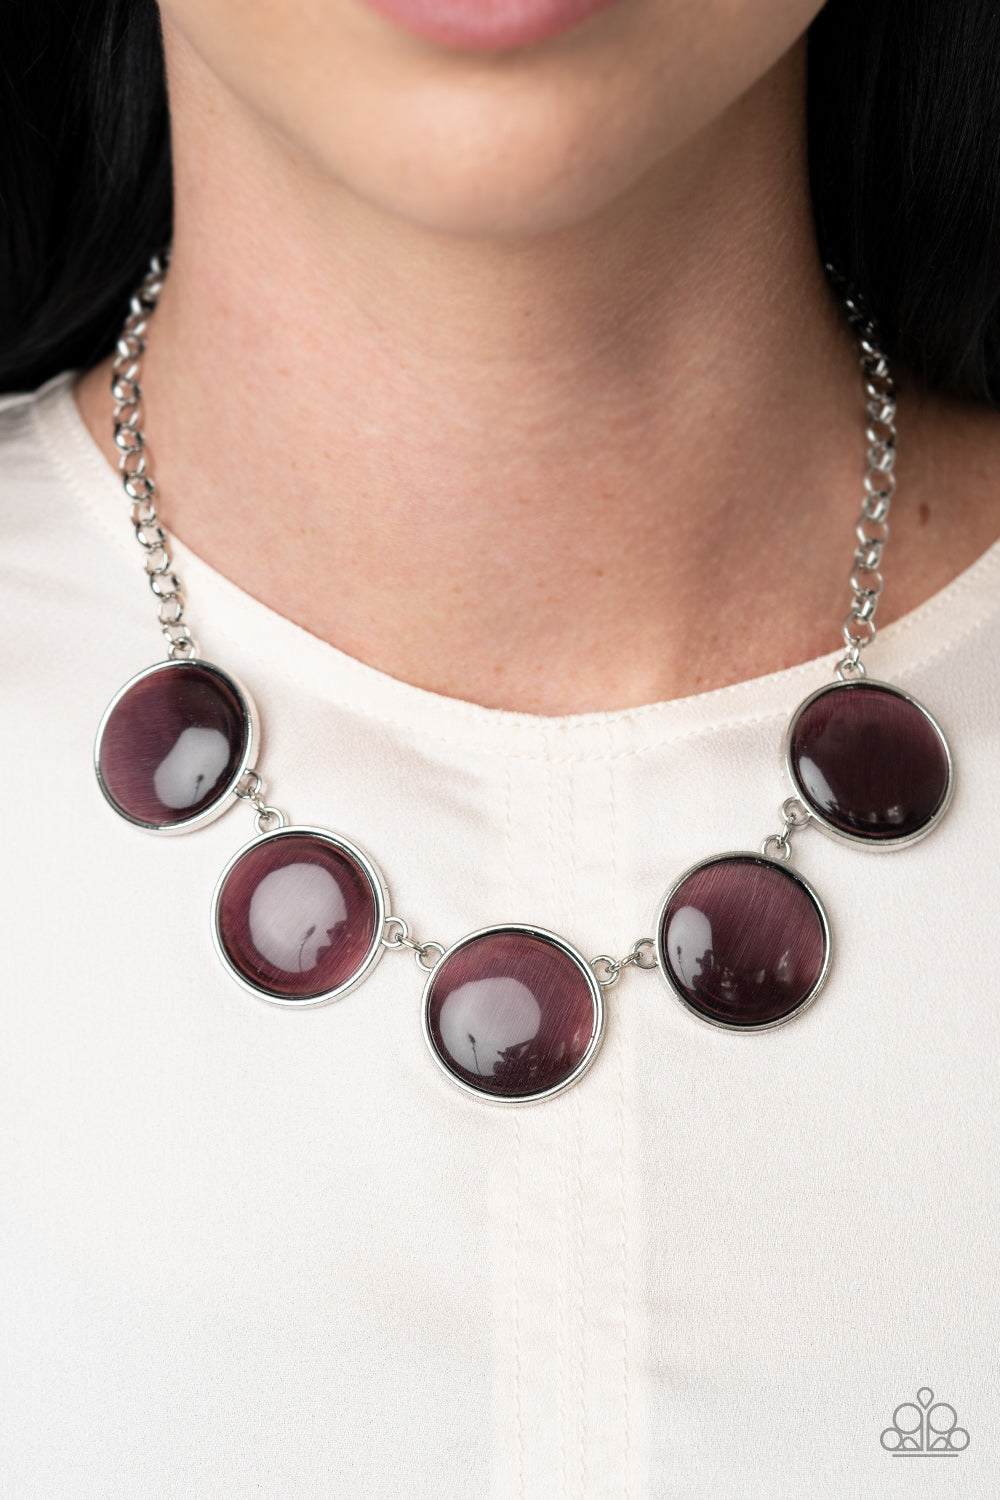 Featuring sleek silver fittings, a collection of round purple cat's eye stone pendants link below the collar for a colorfully ethereal look. Features an adjustable clasp closure.  Sold as one individual necklace. Includes one pair of matching earrings.